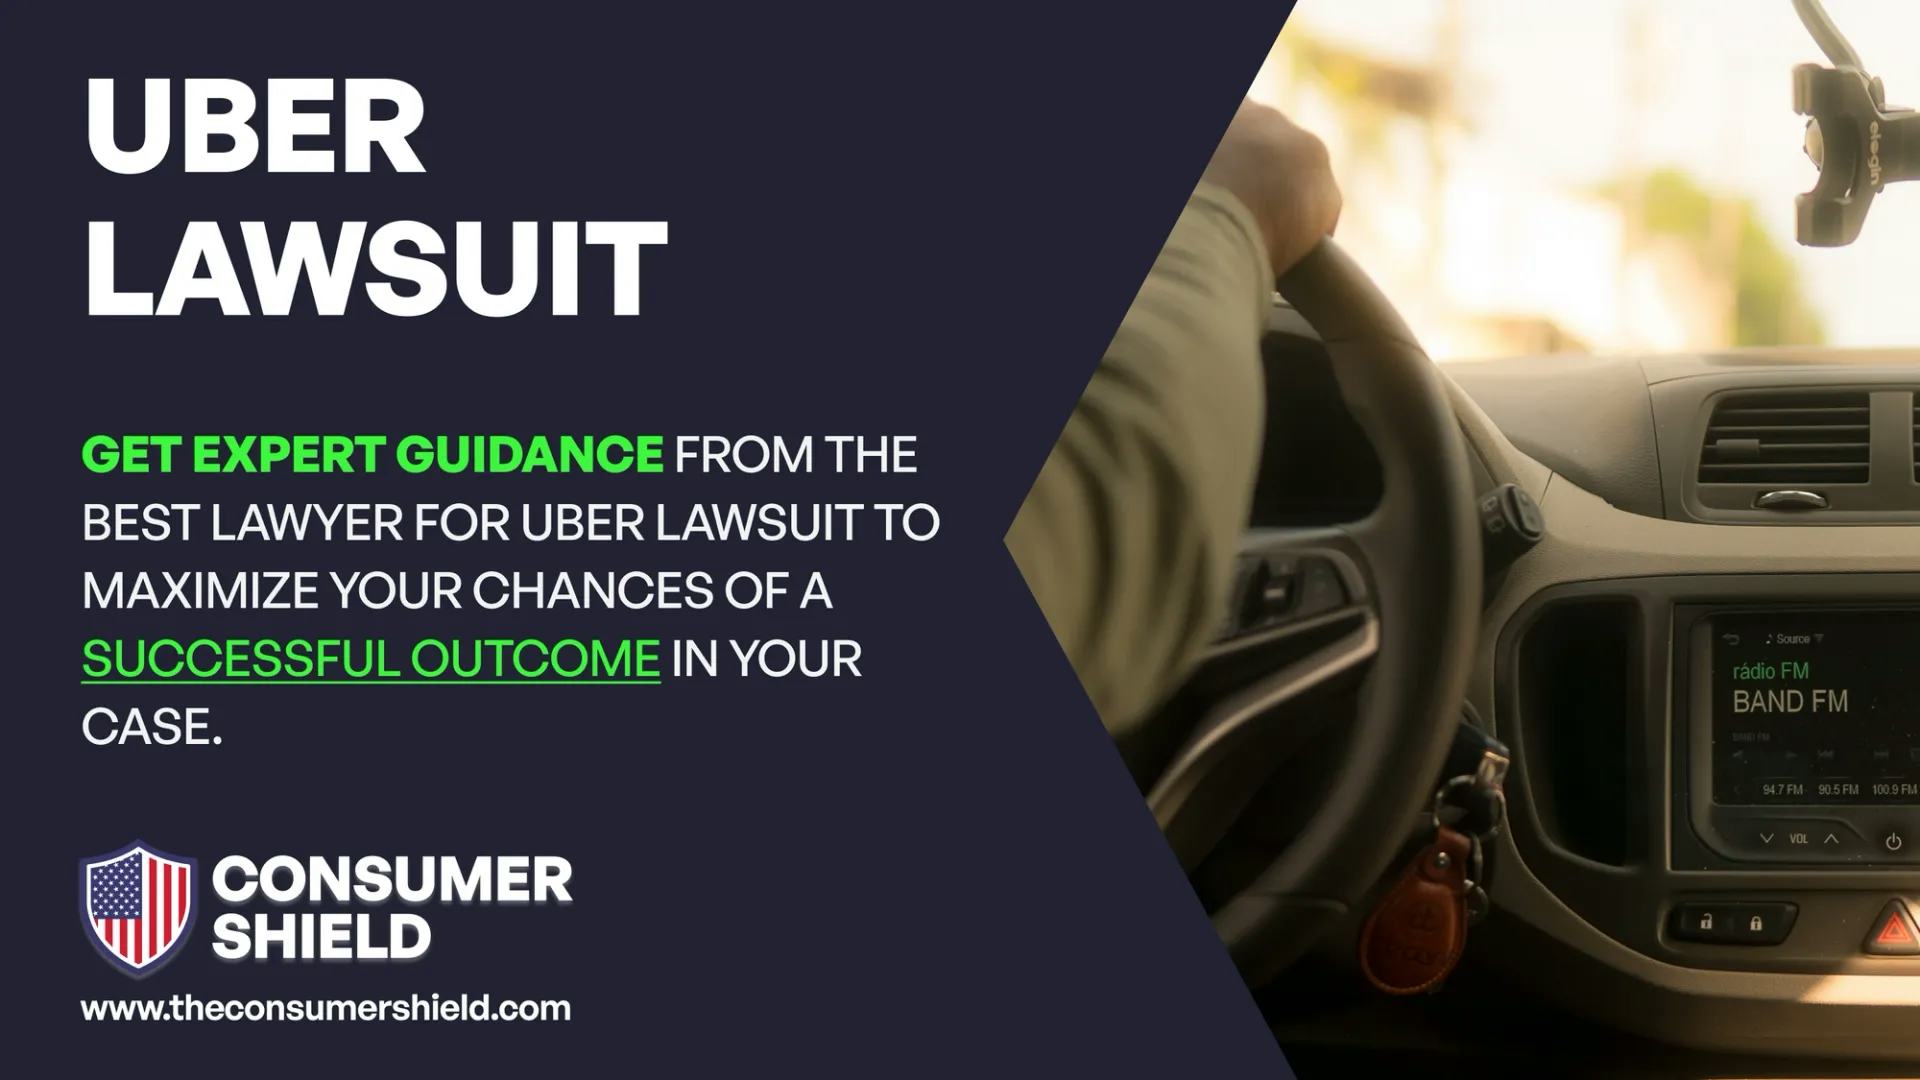 Do I Qualify for the Uber Sexual Assault Lawsuit? Find Out Now